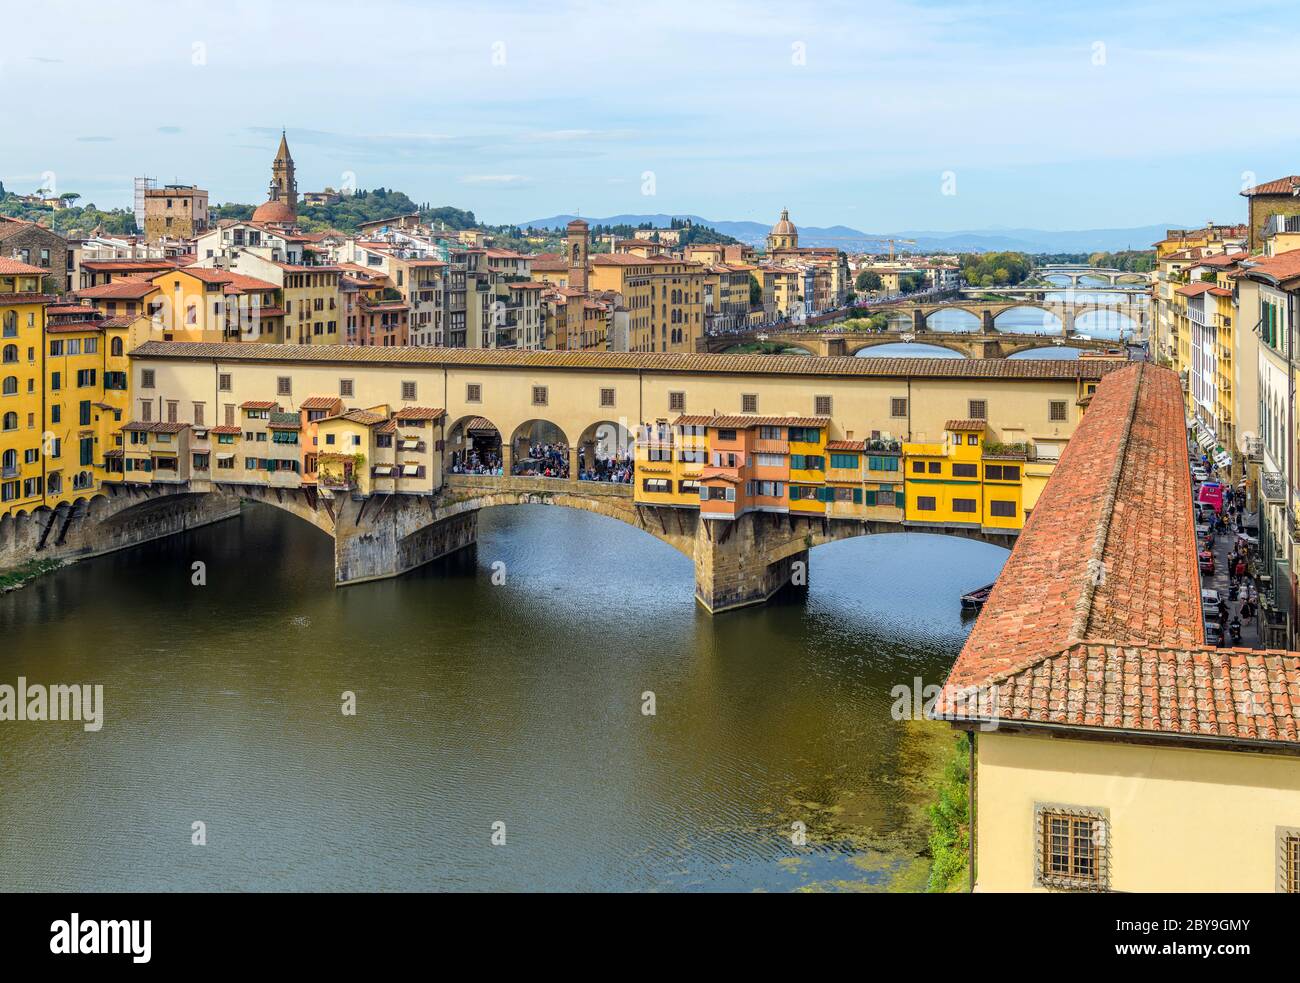 Arno River in Florence - A panoramic overview of Arno River at the Ponte Vecchio 'Old Bridge' in the heart of Florence, Tuscany, Italy. Stock Photo